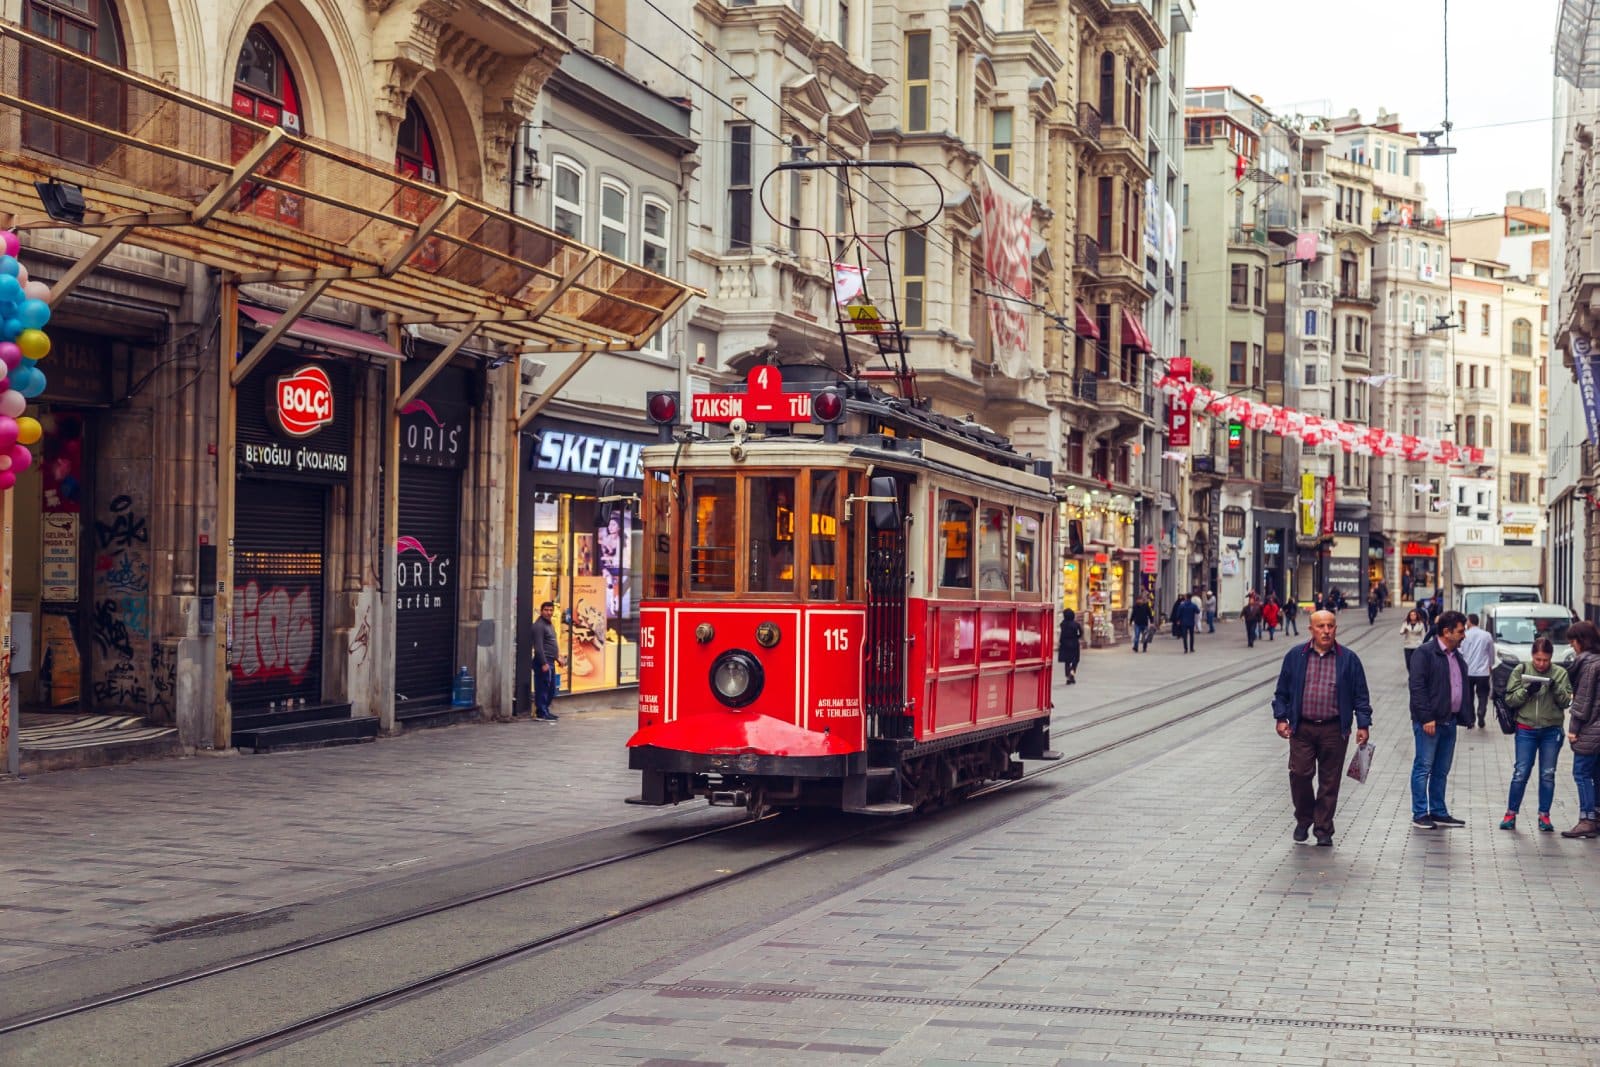 <p class="wp-caption-text">Image Credit: Shutterstock / Lizavetta</p>  <p><span>Istiklal Avenue, a bustling pedestrian street in the heart of Beyolu, is a microcosm of Istanbul’s vibrant urban life. Lined with historic buildings, churches, art galleries, and cinemas, the avenue is a hub of cultural activity. The nostalgic tram running down its length adds to its charm. Istiklal Avenue is also home to a diverse array of shops, cafes, and restaurants, offering everything from traditional Turkish cuisine to international fare. It is a perfect spot for people to watch and soak in the city’s contemporary culture.</span></p>